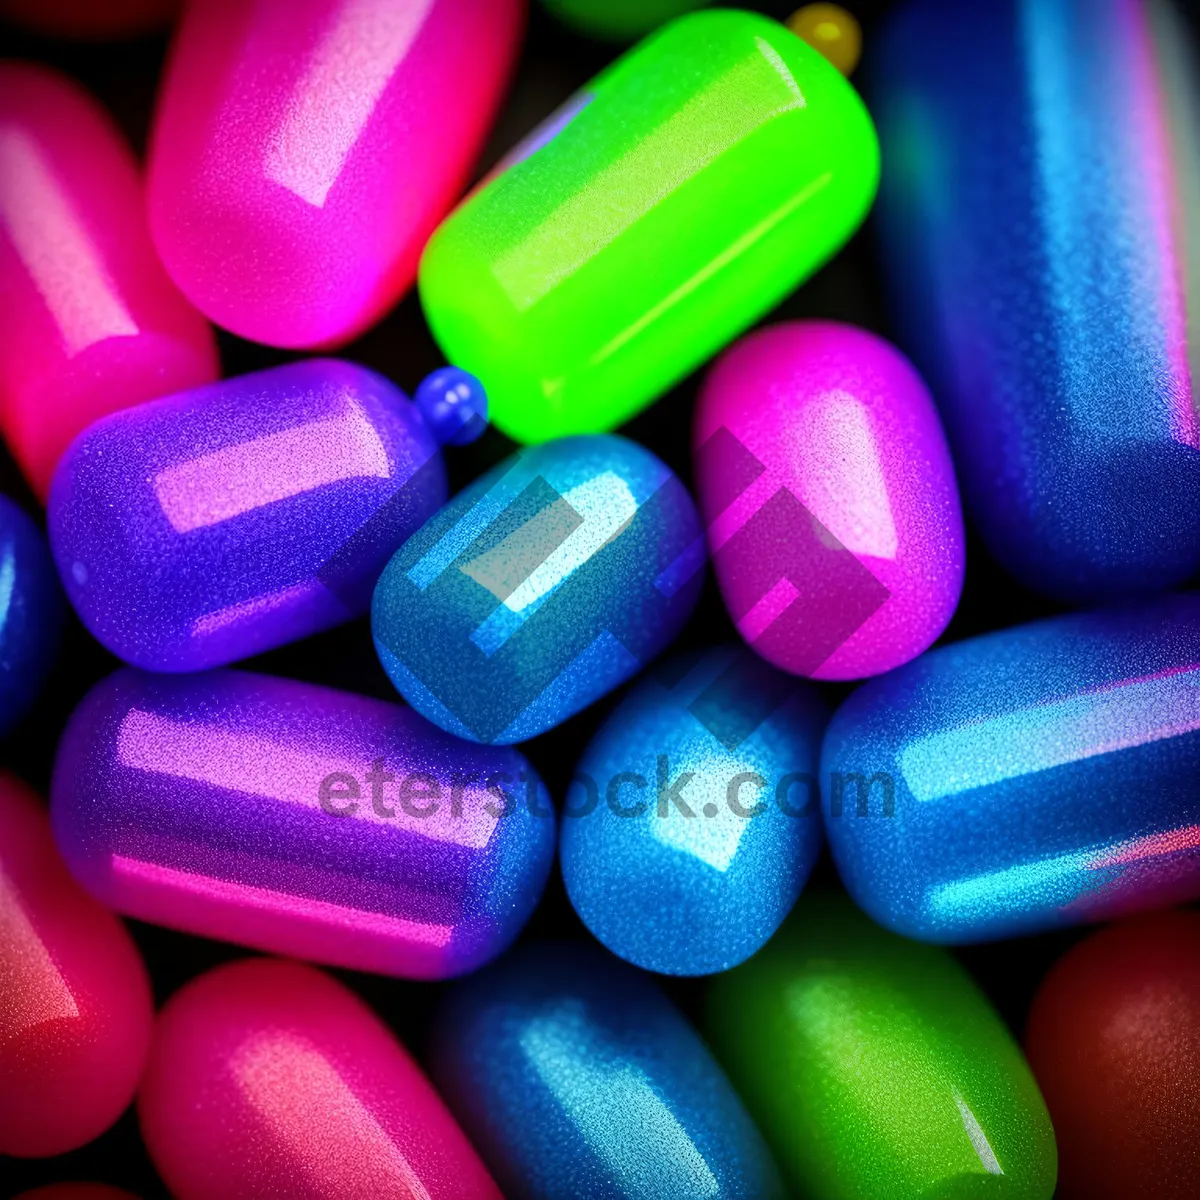 Picture of Vibrant Medication Palette: Pills, Capsules & Colorful Remedies